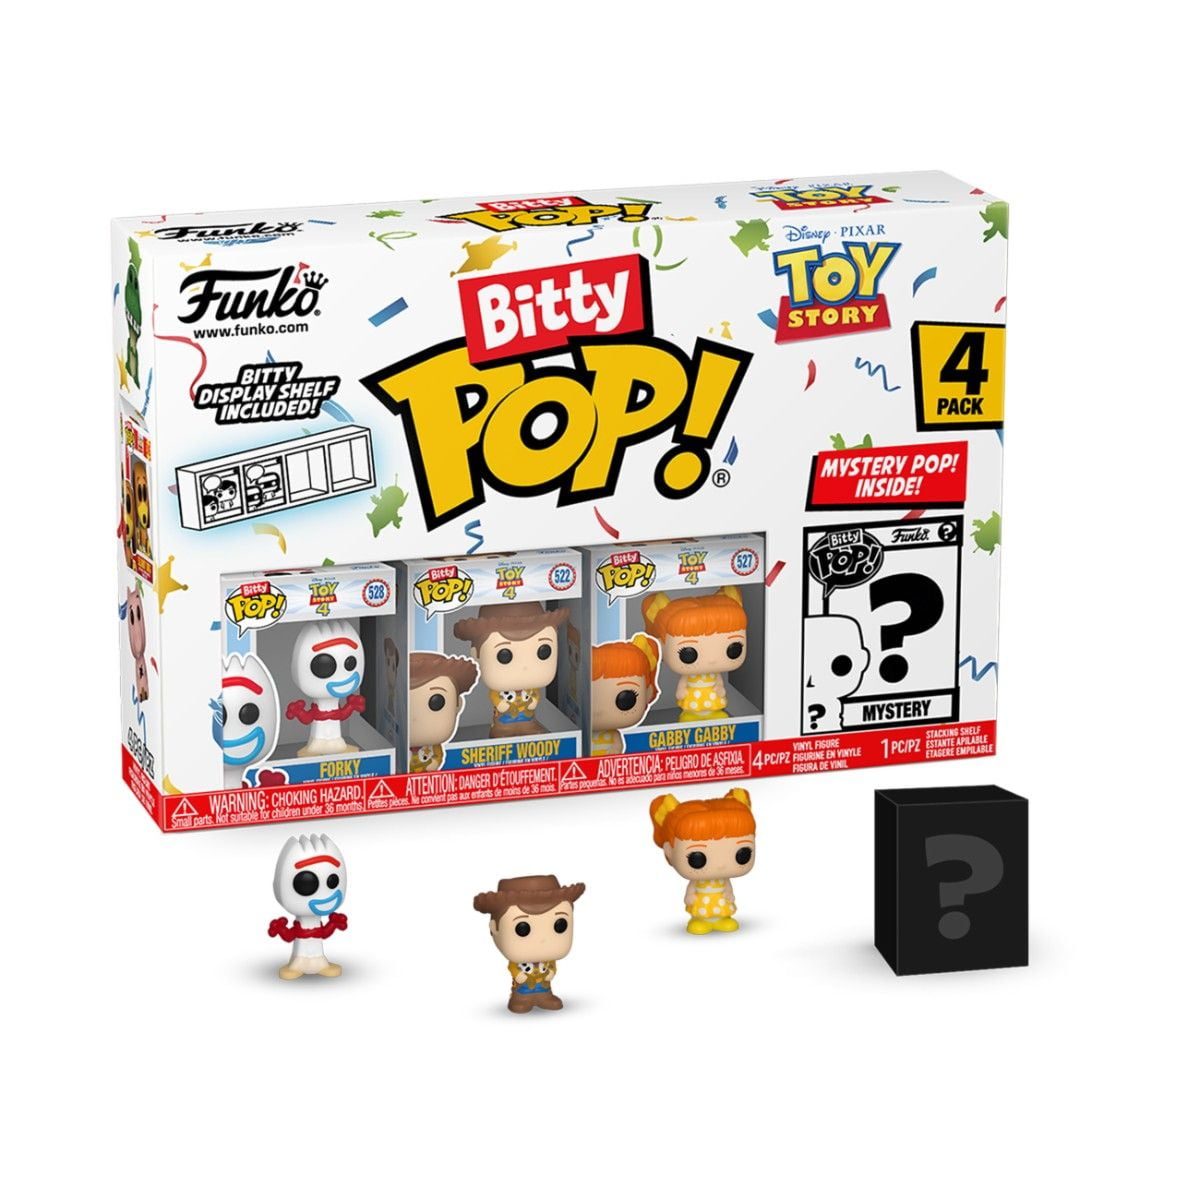 Forky - Toy Story - Funko Bitty POP! (4 Pack)